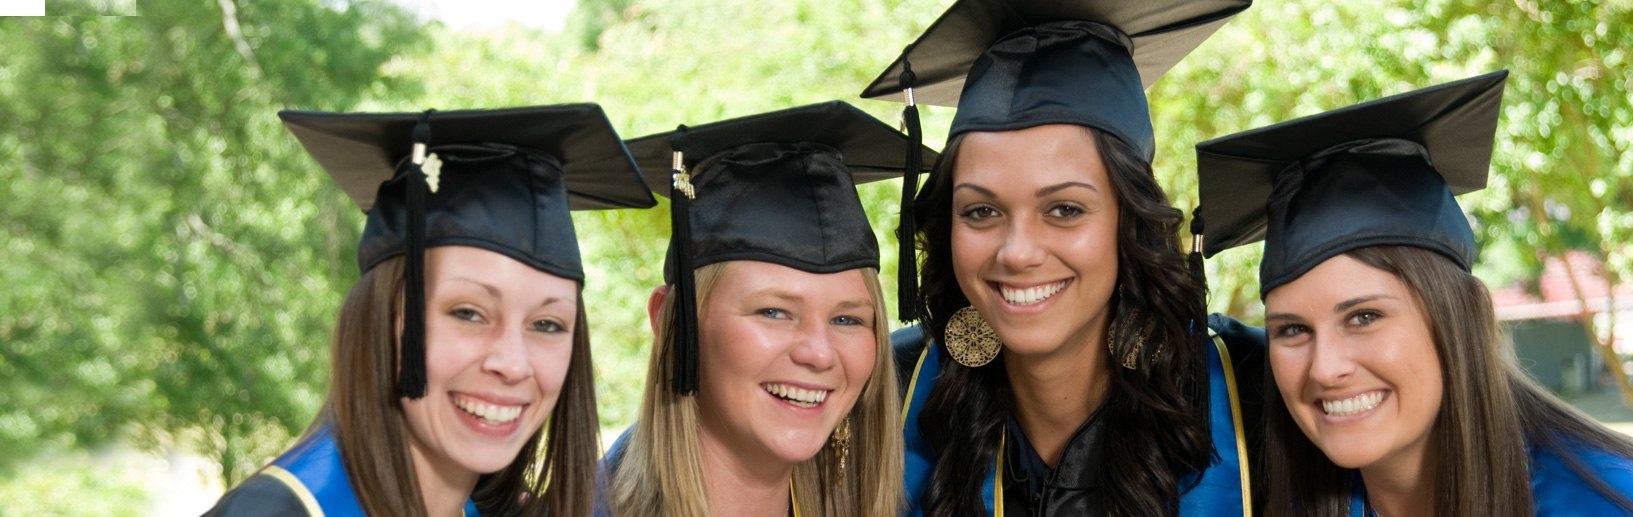 group of 4 female graduates in cap and gown